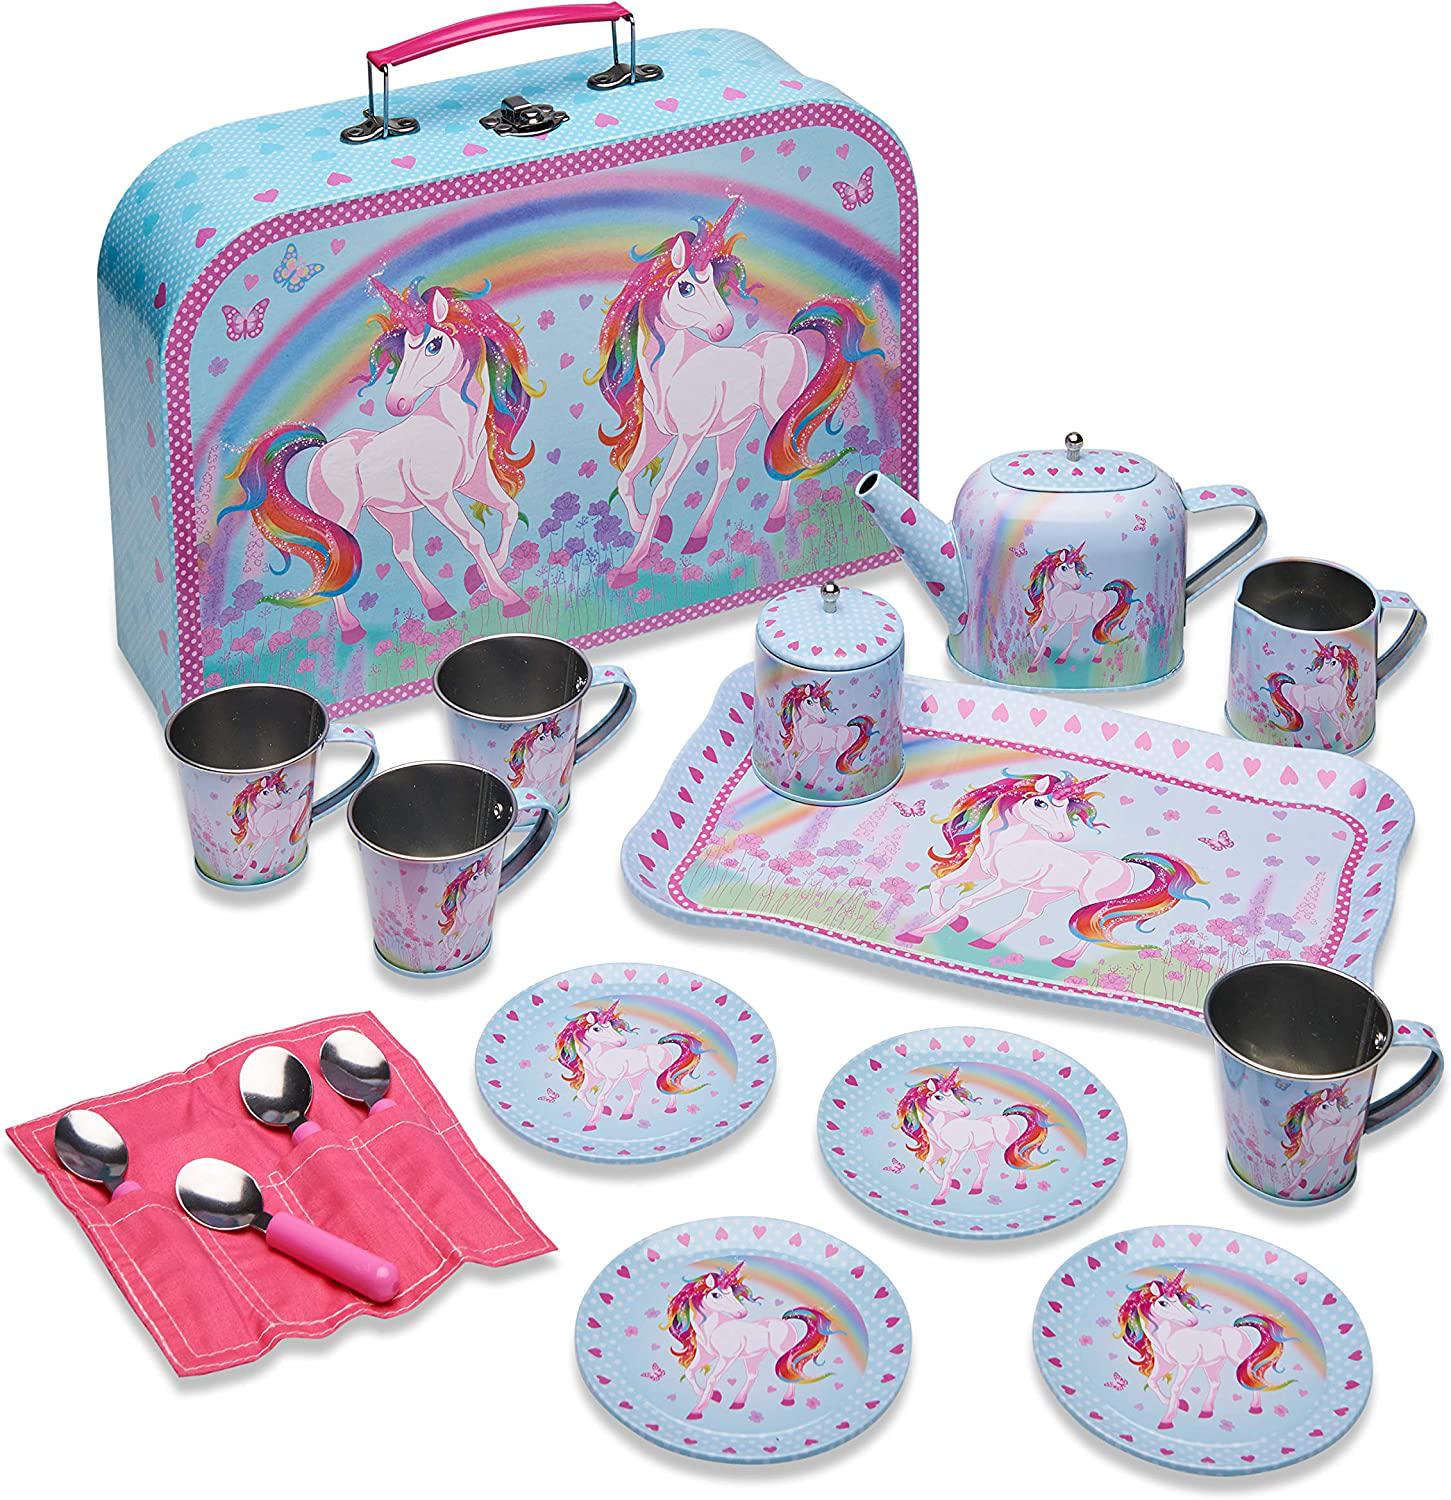 Wobbly Jelly, Wobbly Jelly 'Unicorn Dream' Metal Café Set and Carry Case Toy (14 Piece Pink Tea Set for Children)